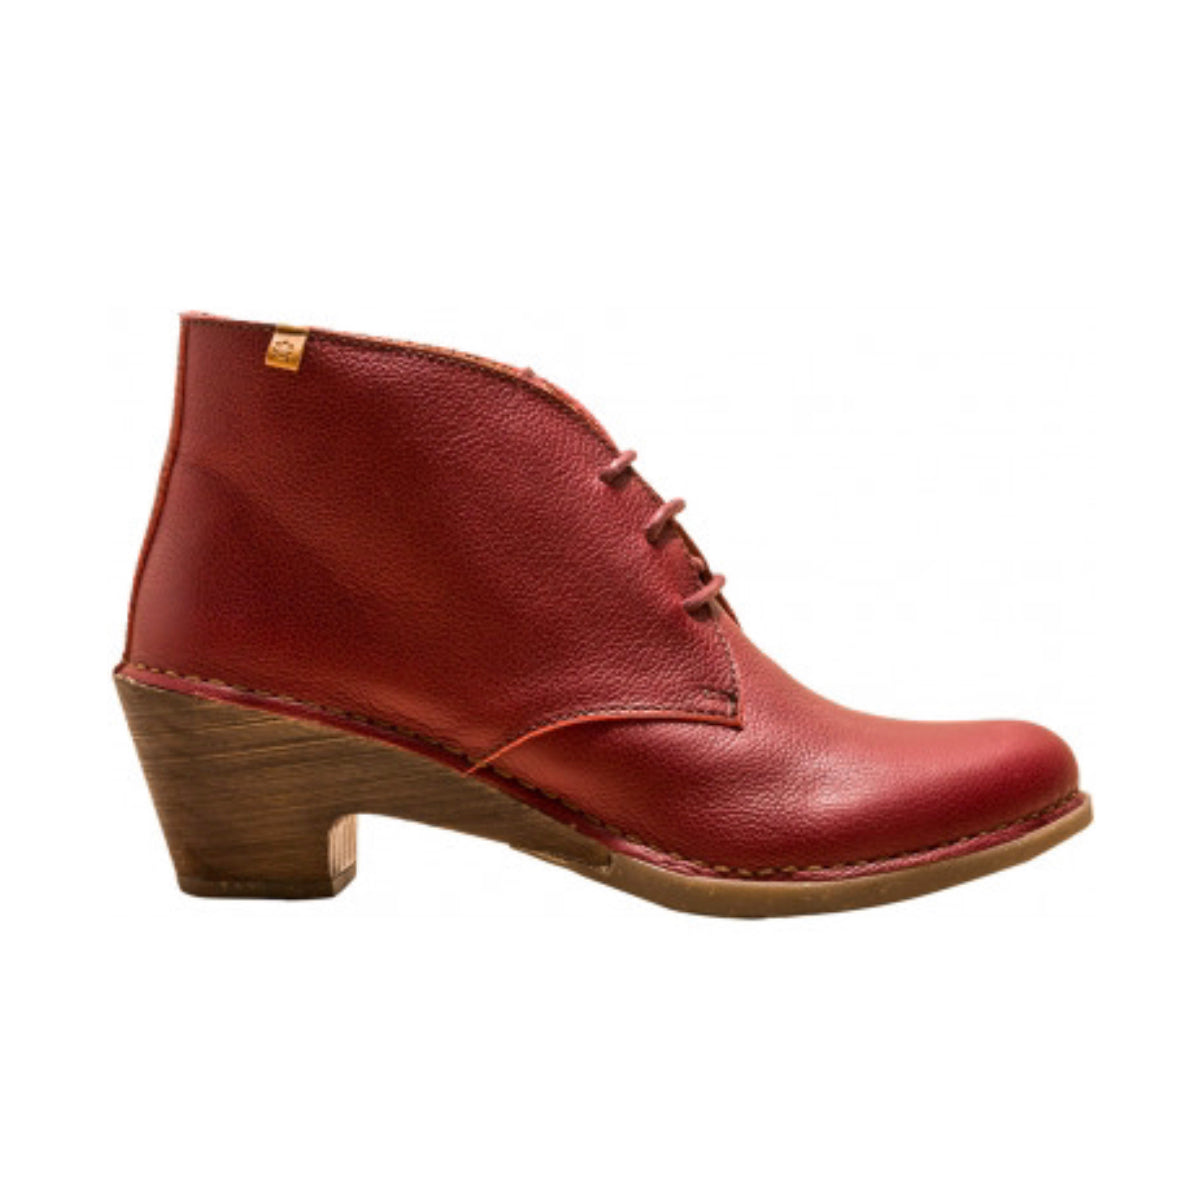 El Naturalista 5490 Cereza Red Sylvan 3 Eyelet Ankle Boot Made In Spain